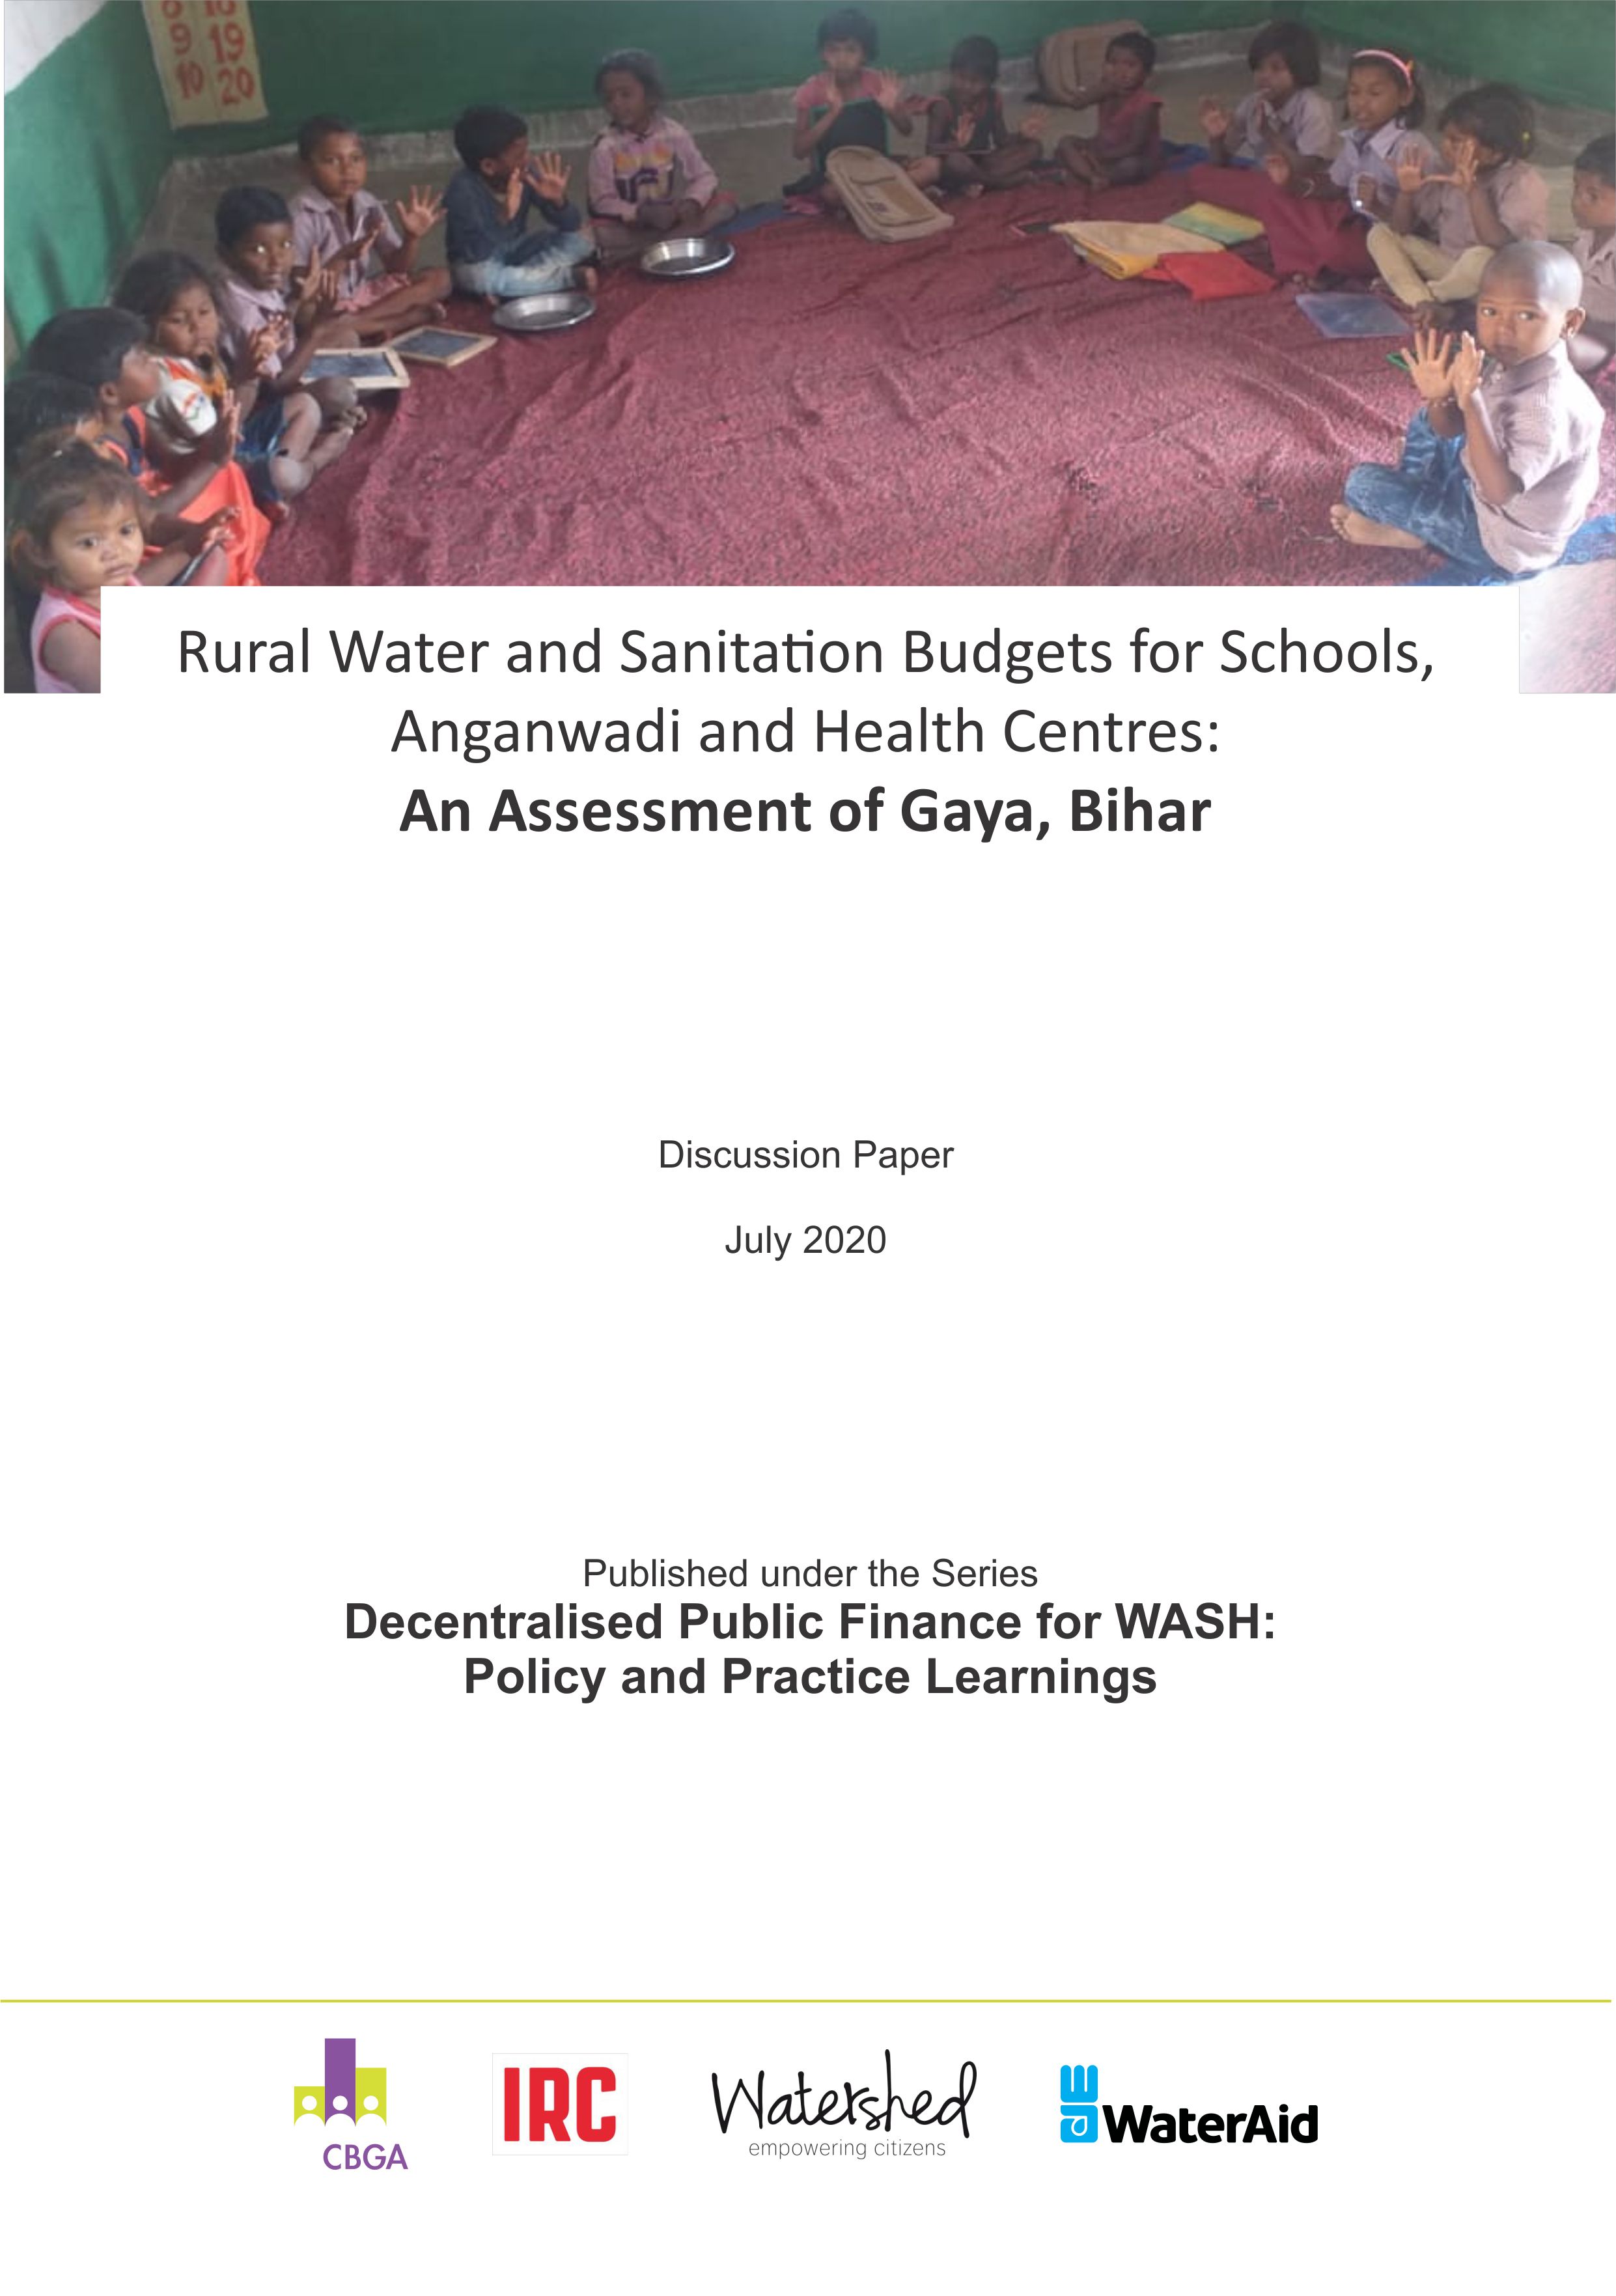 Budgets for WASH in Social Sector Institutions - Gaya